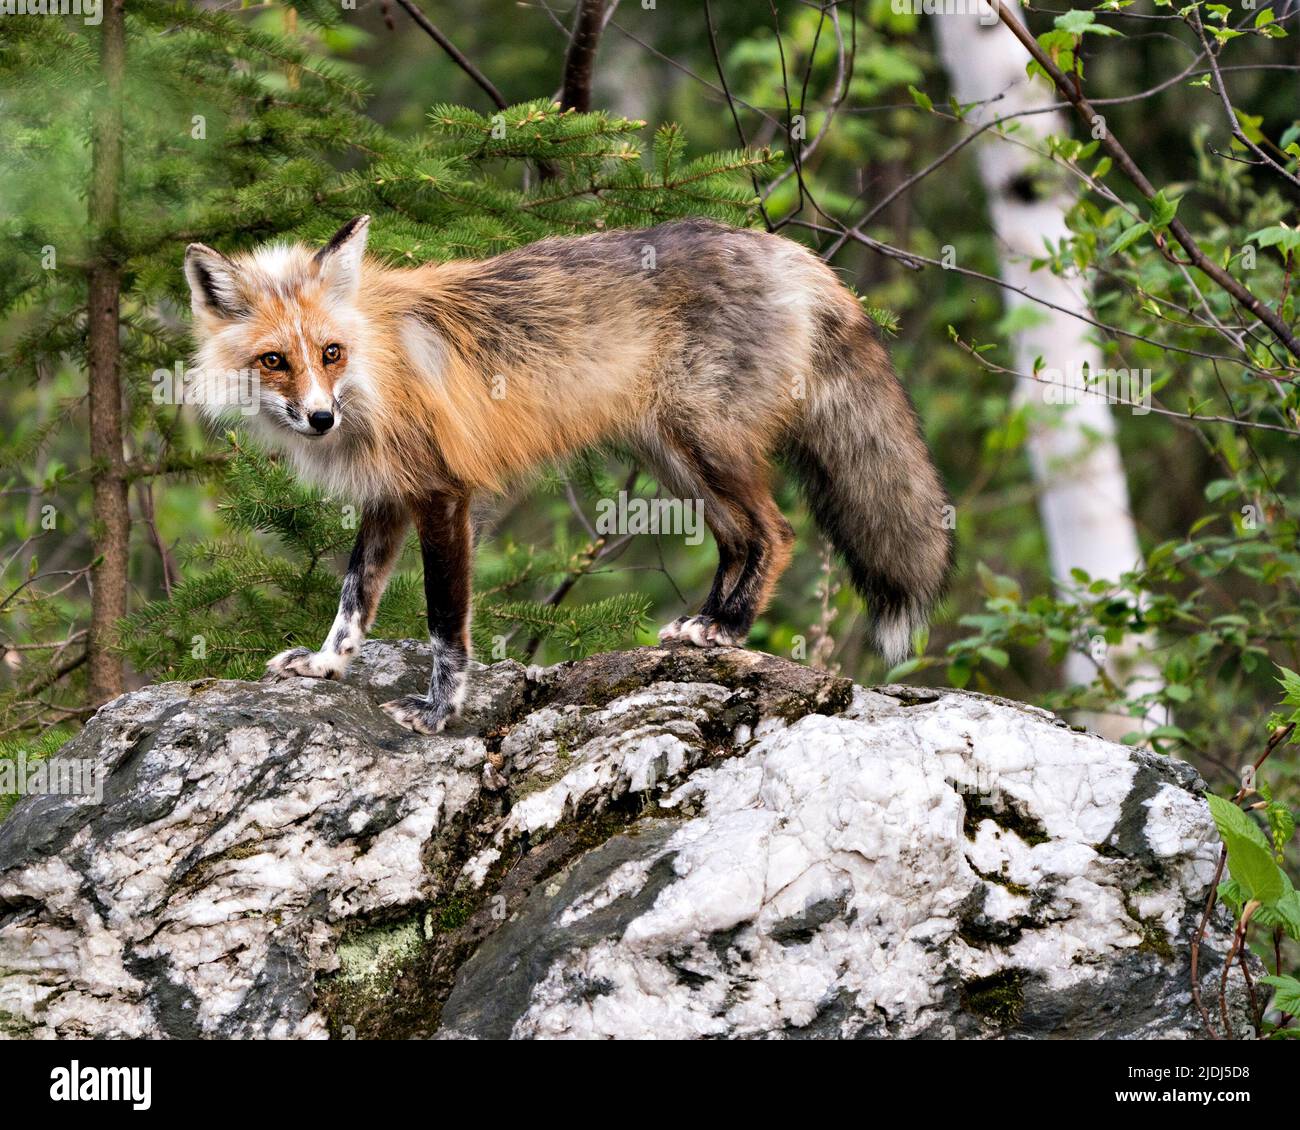 Red fox close-up standing on a big rock with forest background in its habitat and environment. Picture. Portrait. Fox Image. Stock Photo